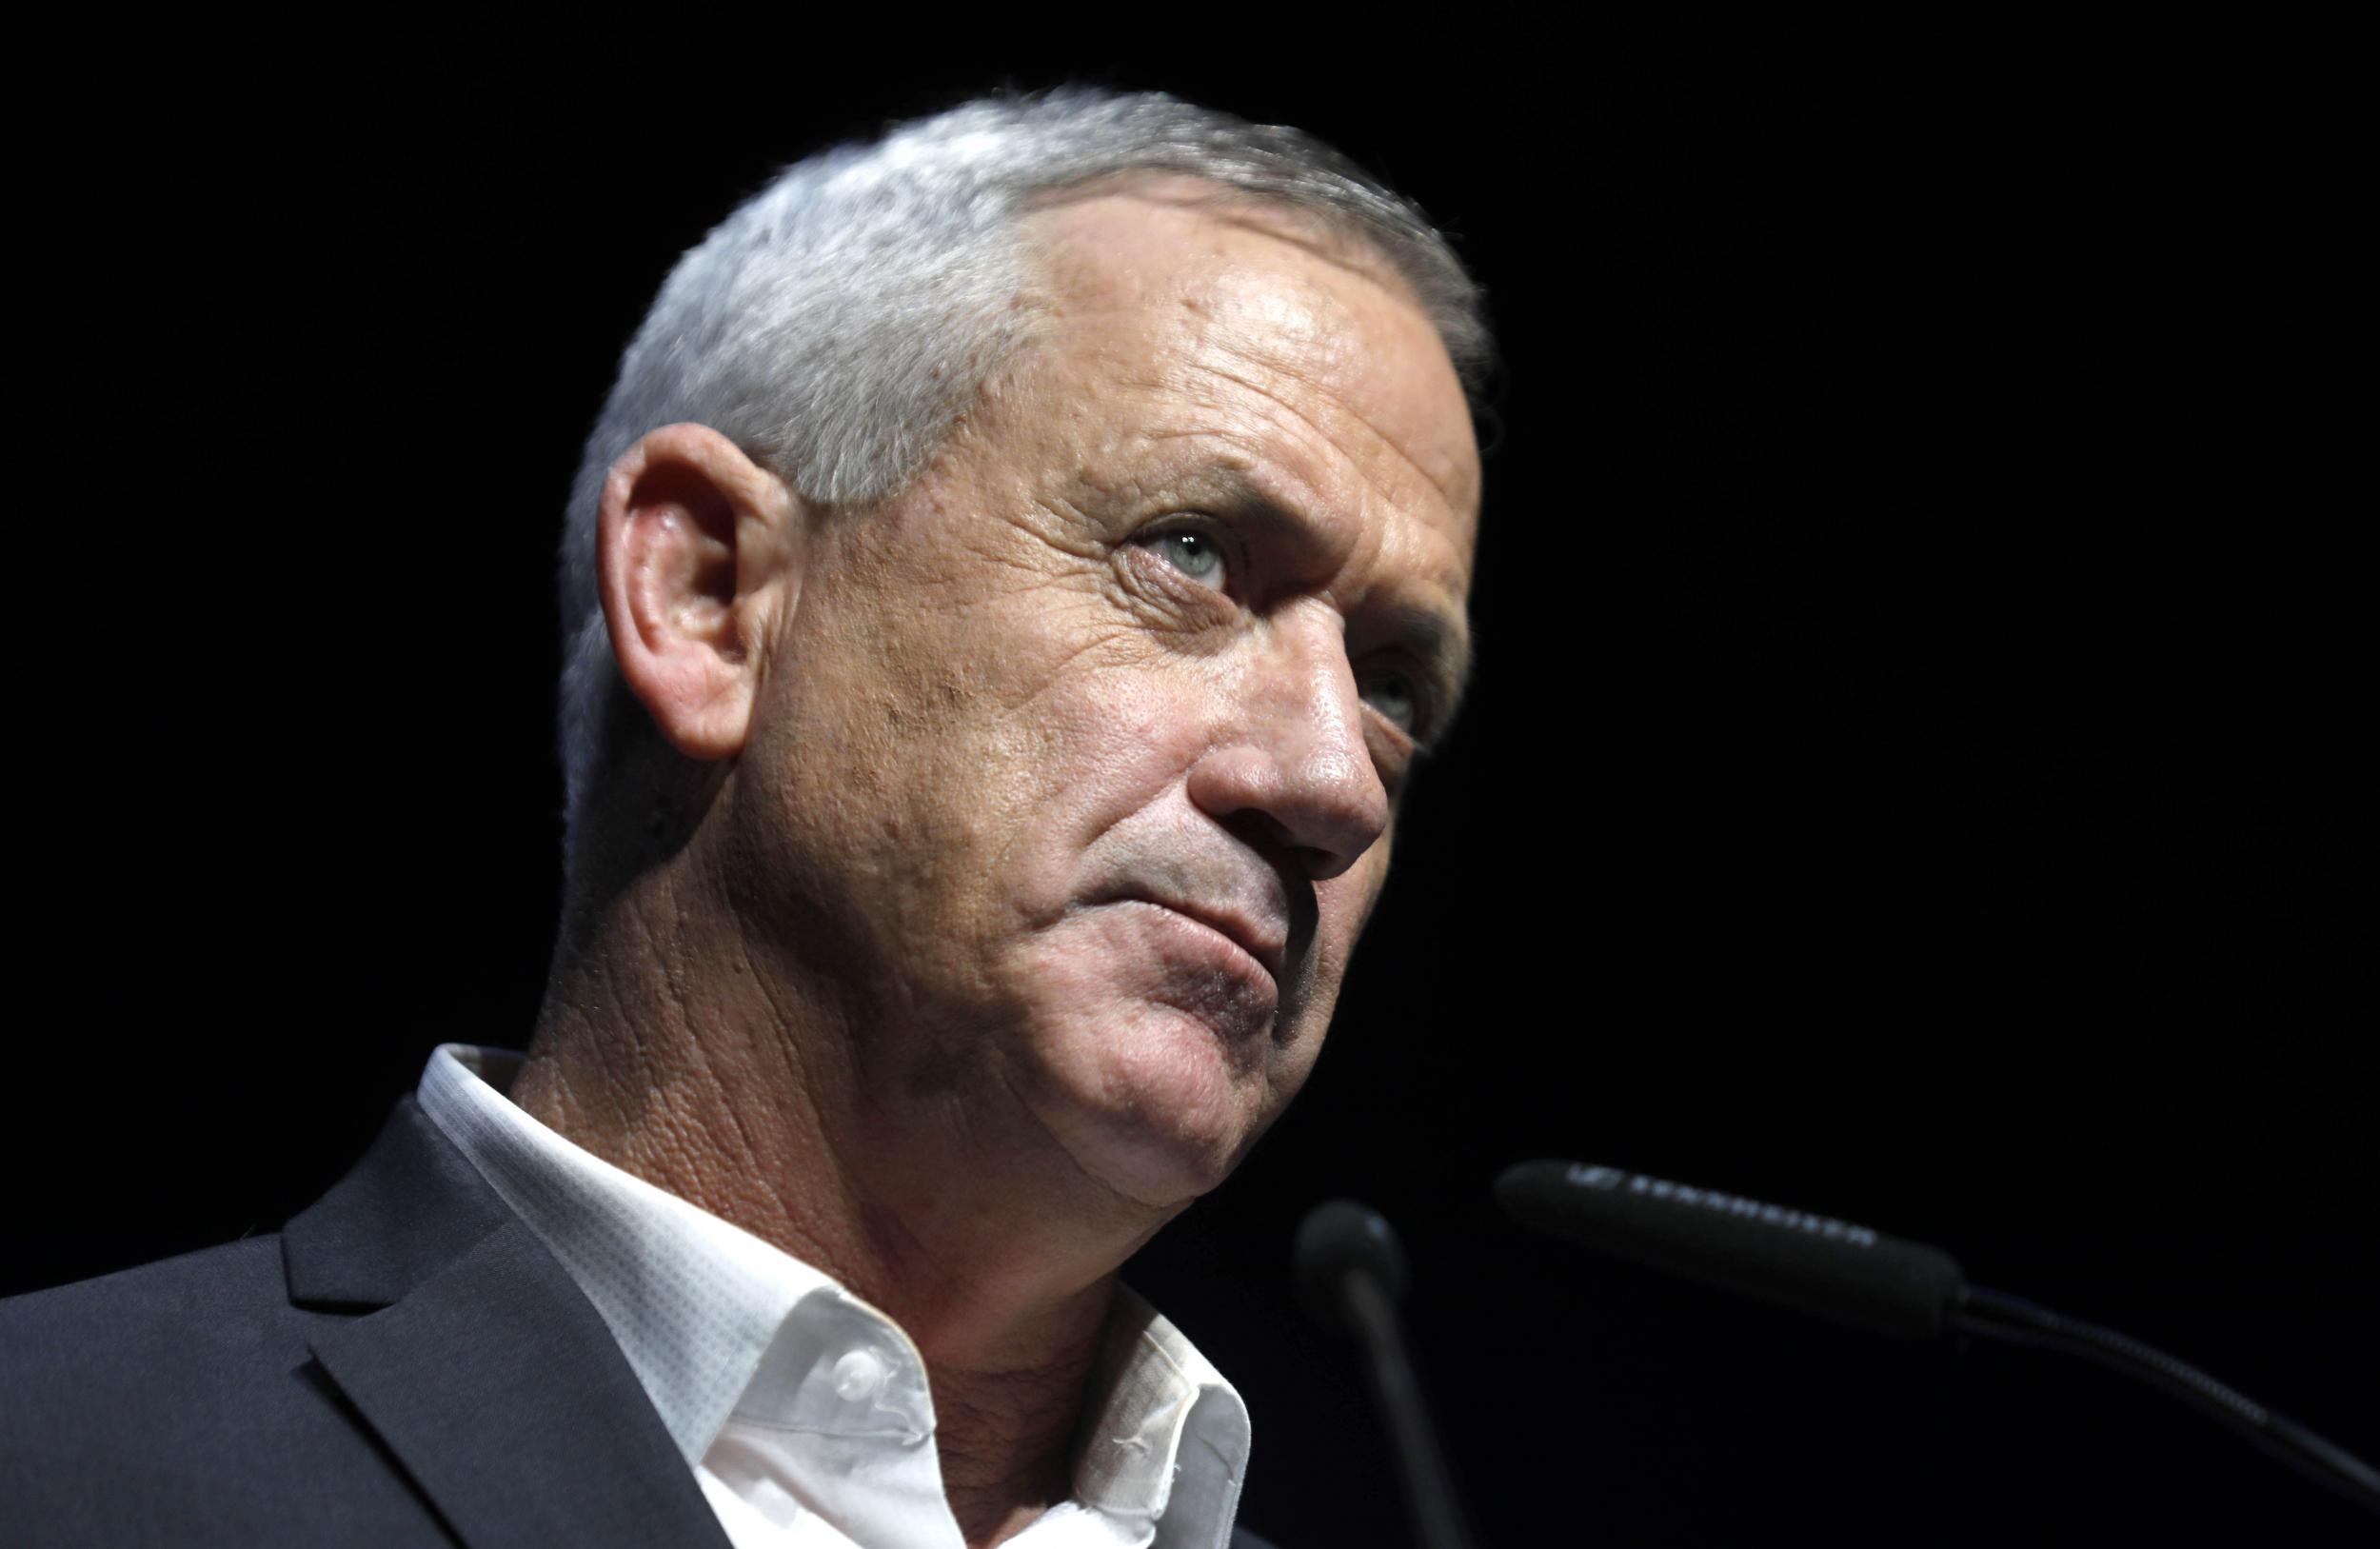 The main leader of Israeli centrist Blue and White alliance, Benny Gantz, attends a campaign convention in the southern Israeli city of Beersheva